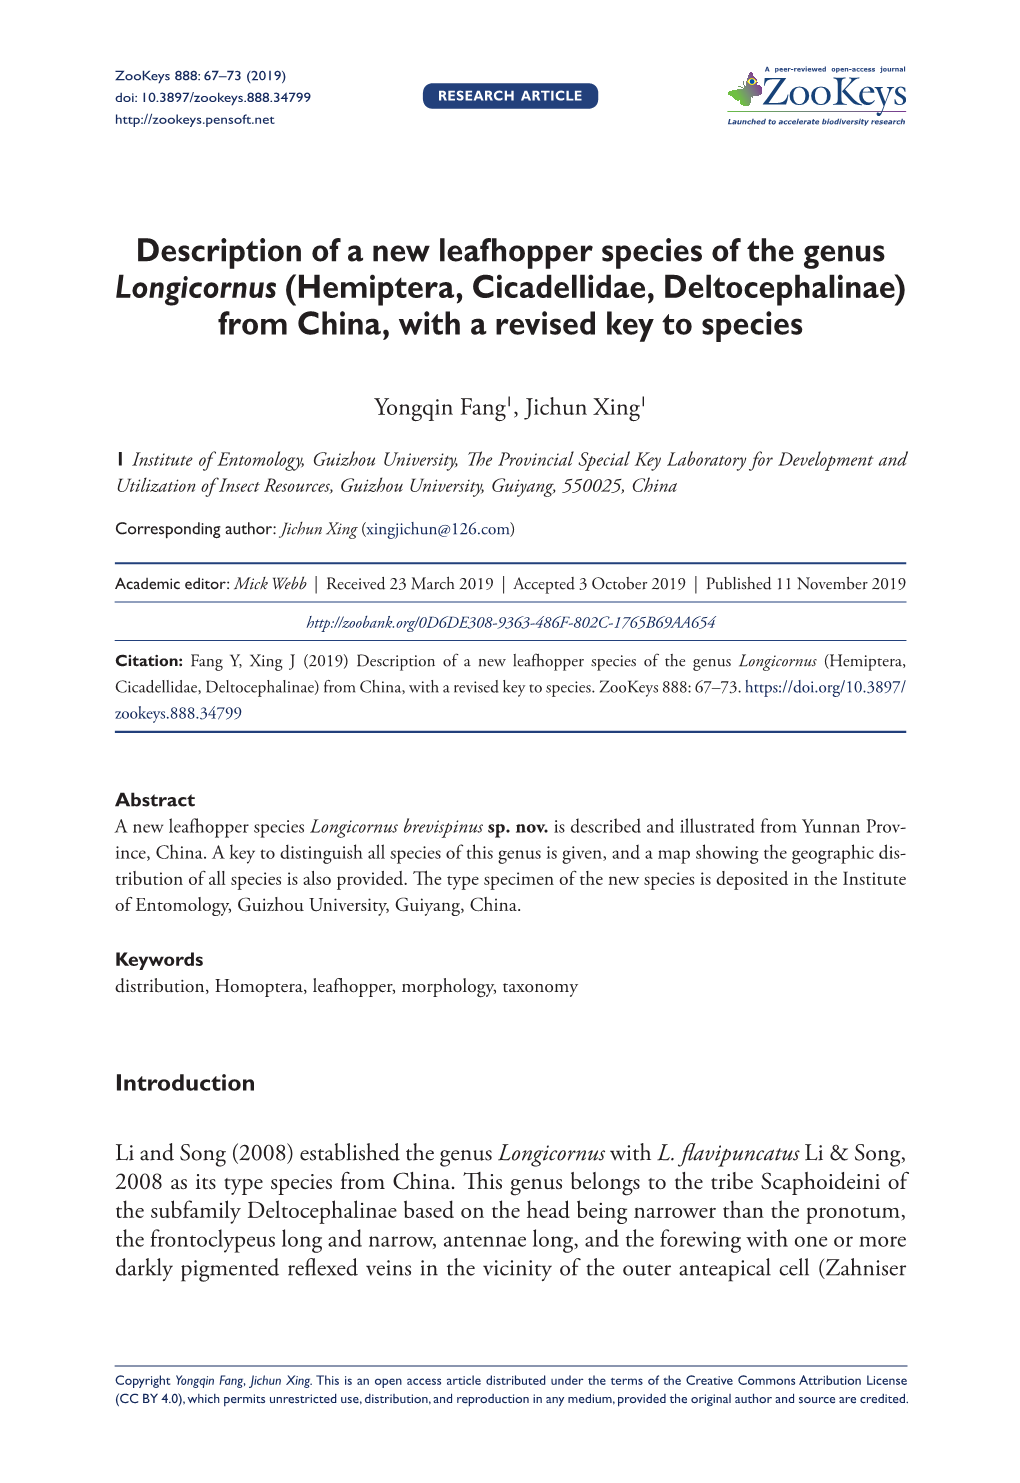 Description of a New Leafhopper Species of the Genus Longicornus (Hemiptera, Cicadellidae, Deltocephalinae) from China, with a Revised Key to Species